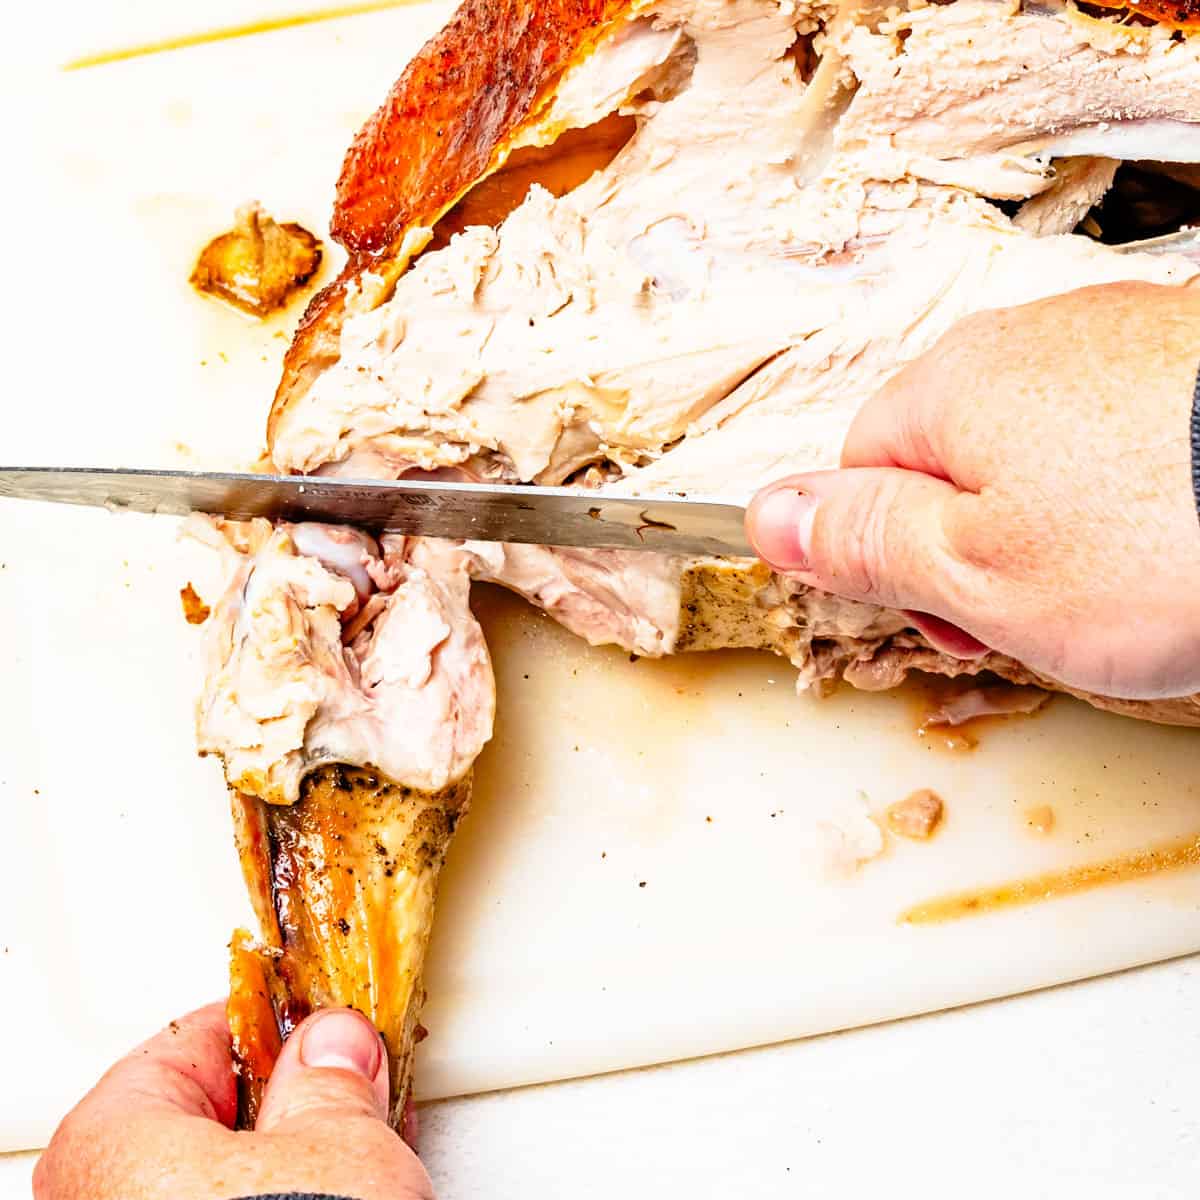 Cutting the wing drum from a roasted turkey.